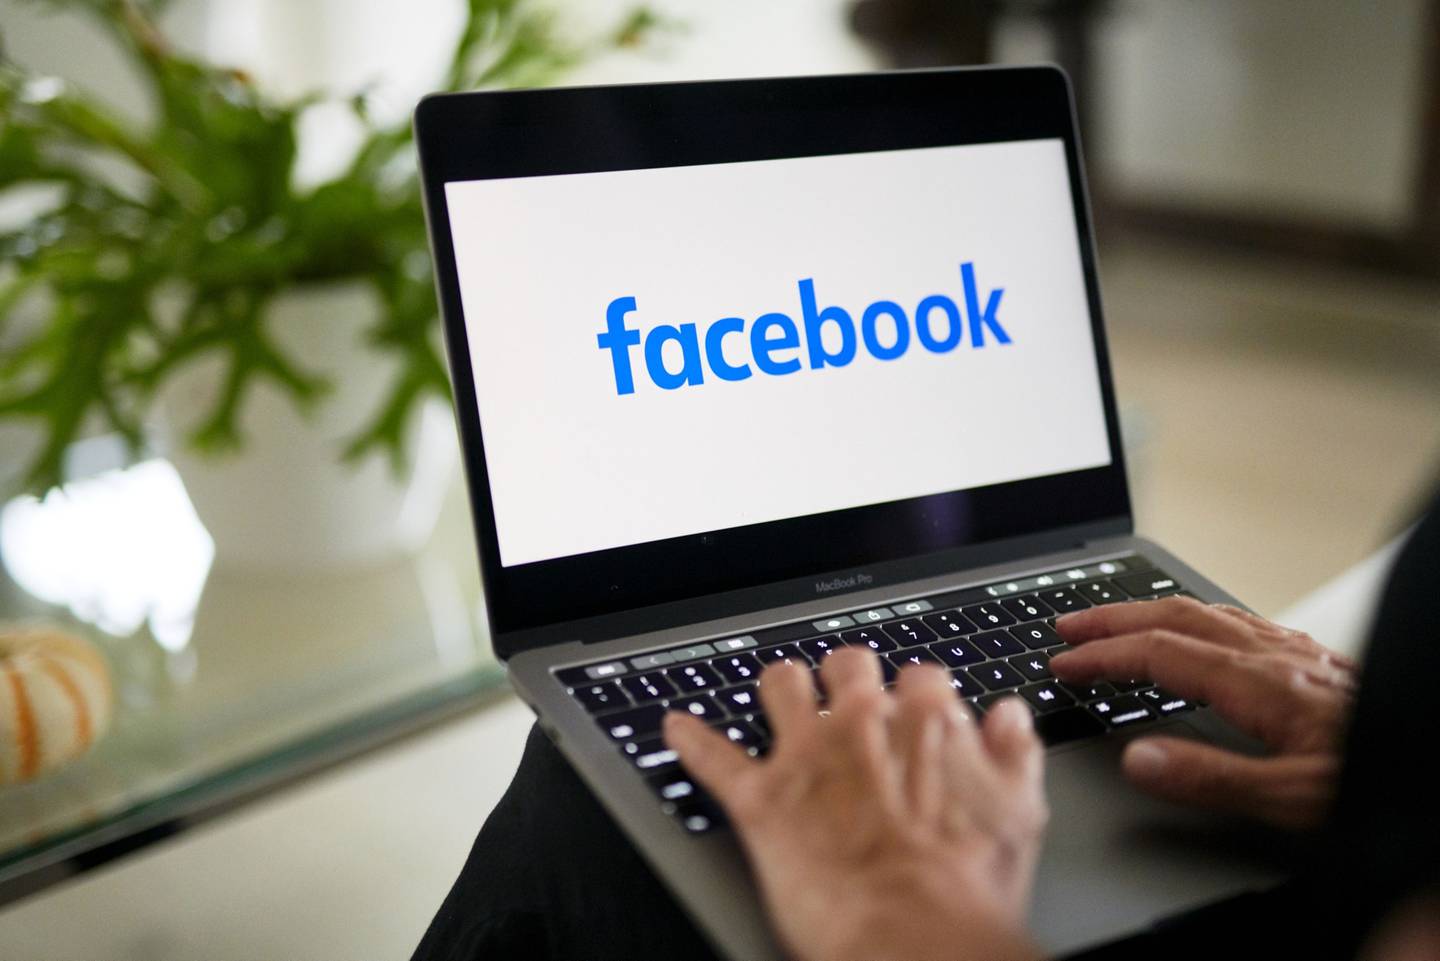 The logo for Facebook is displayed on a laptop computer in an arranged photograph taken in Little Falls, New Jersey.